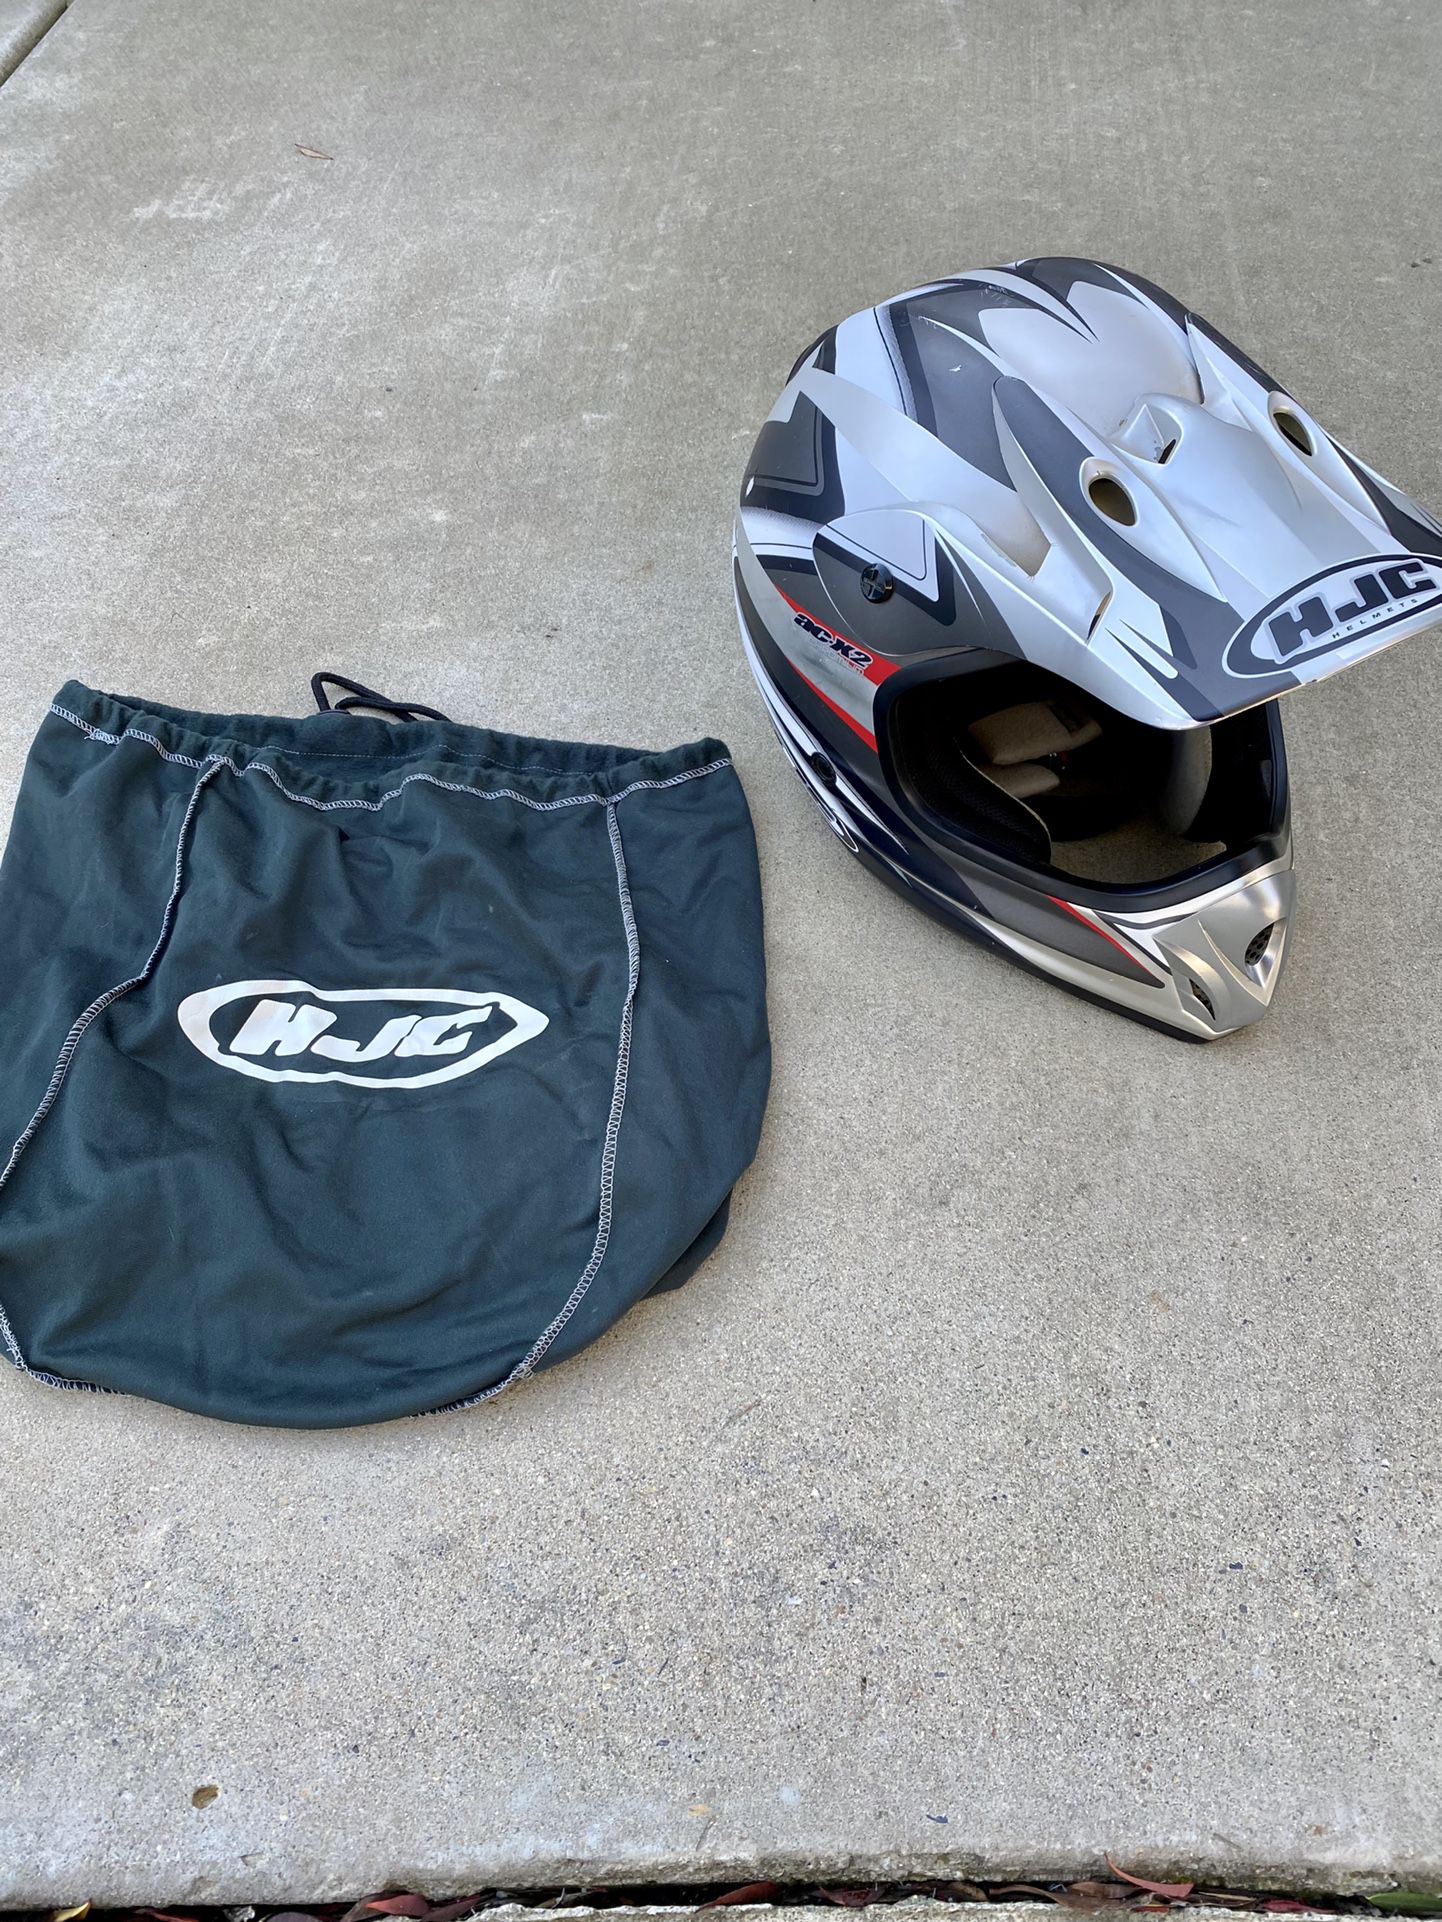 Motorcycle Helmet With Cover